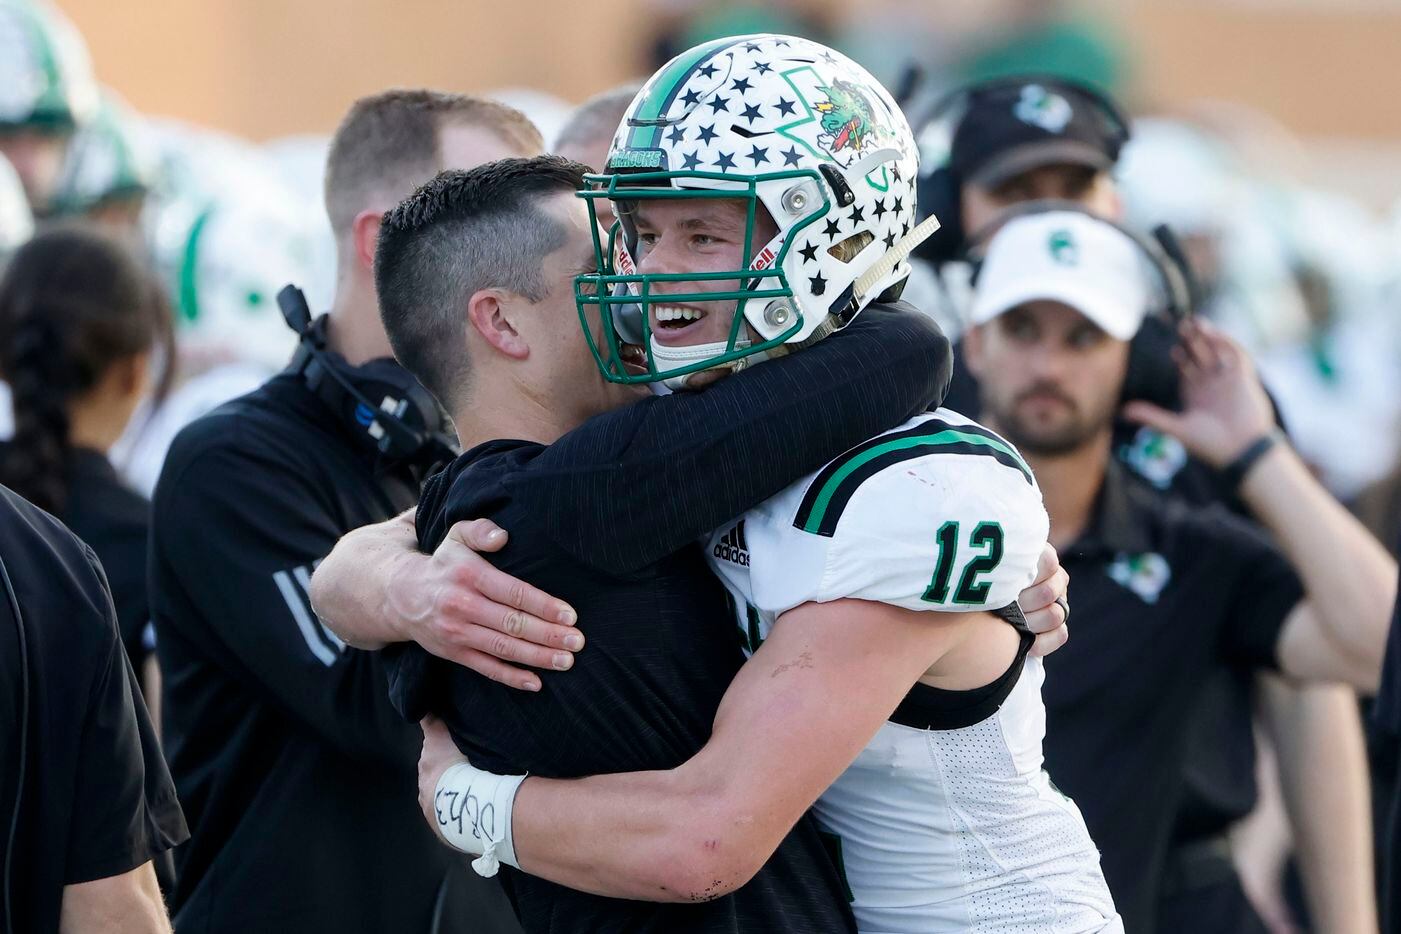 Southlake quarterback Kaden Anderson (12) is hugged by coach Riley Dodge during the second half of a Class 6A Division I Region I final high school football game against Allen,  in Denton, Texas on Saturday, Dec. 4, 2021. Southlake defeated Allen 47-21. (Michael Ainsworth/Special Contributor)